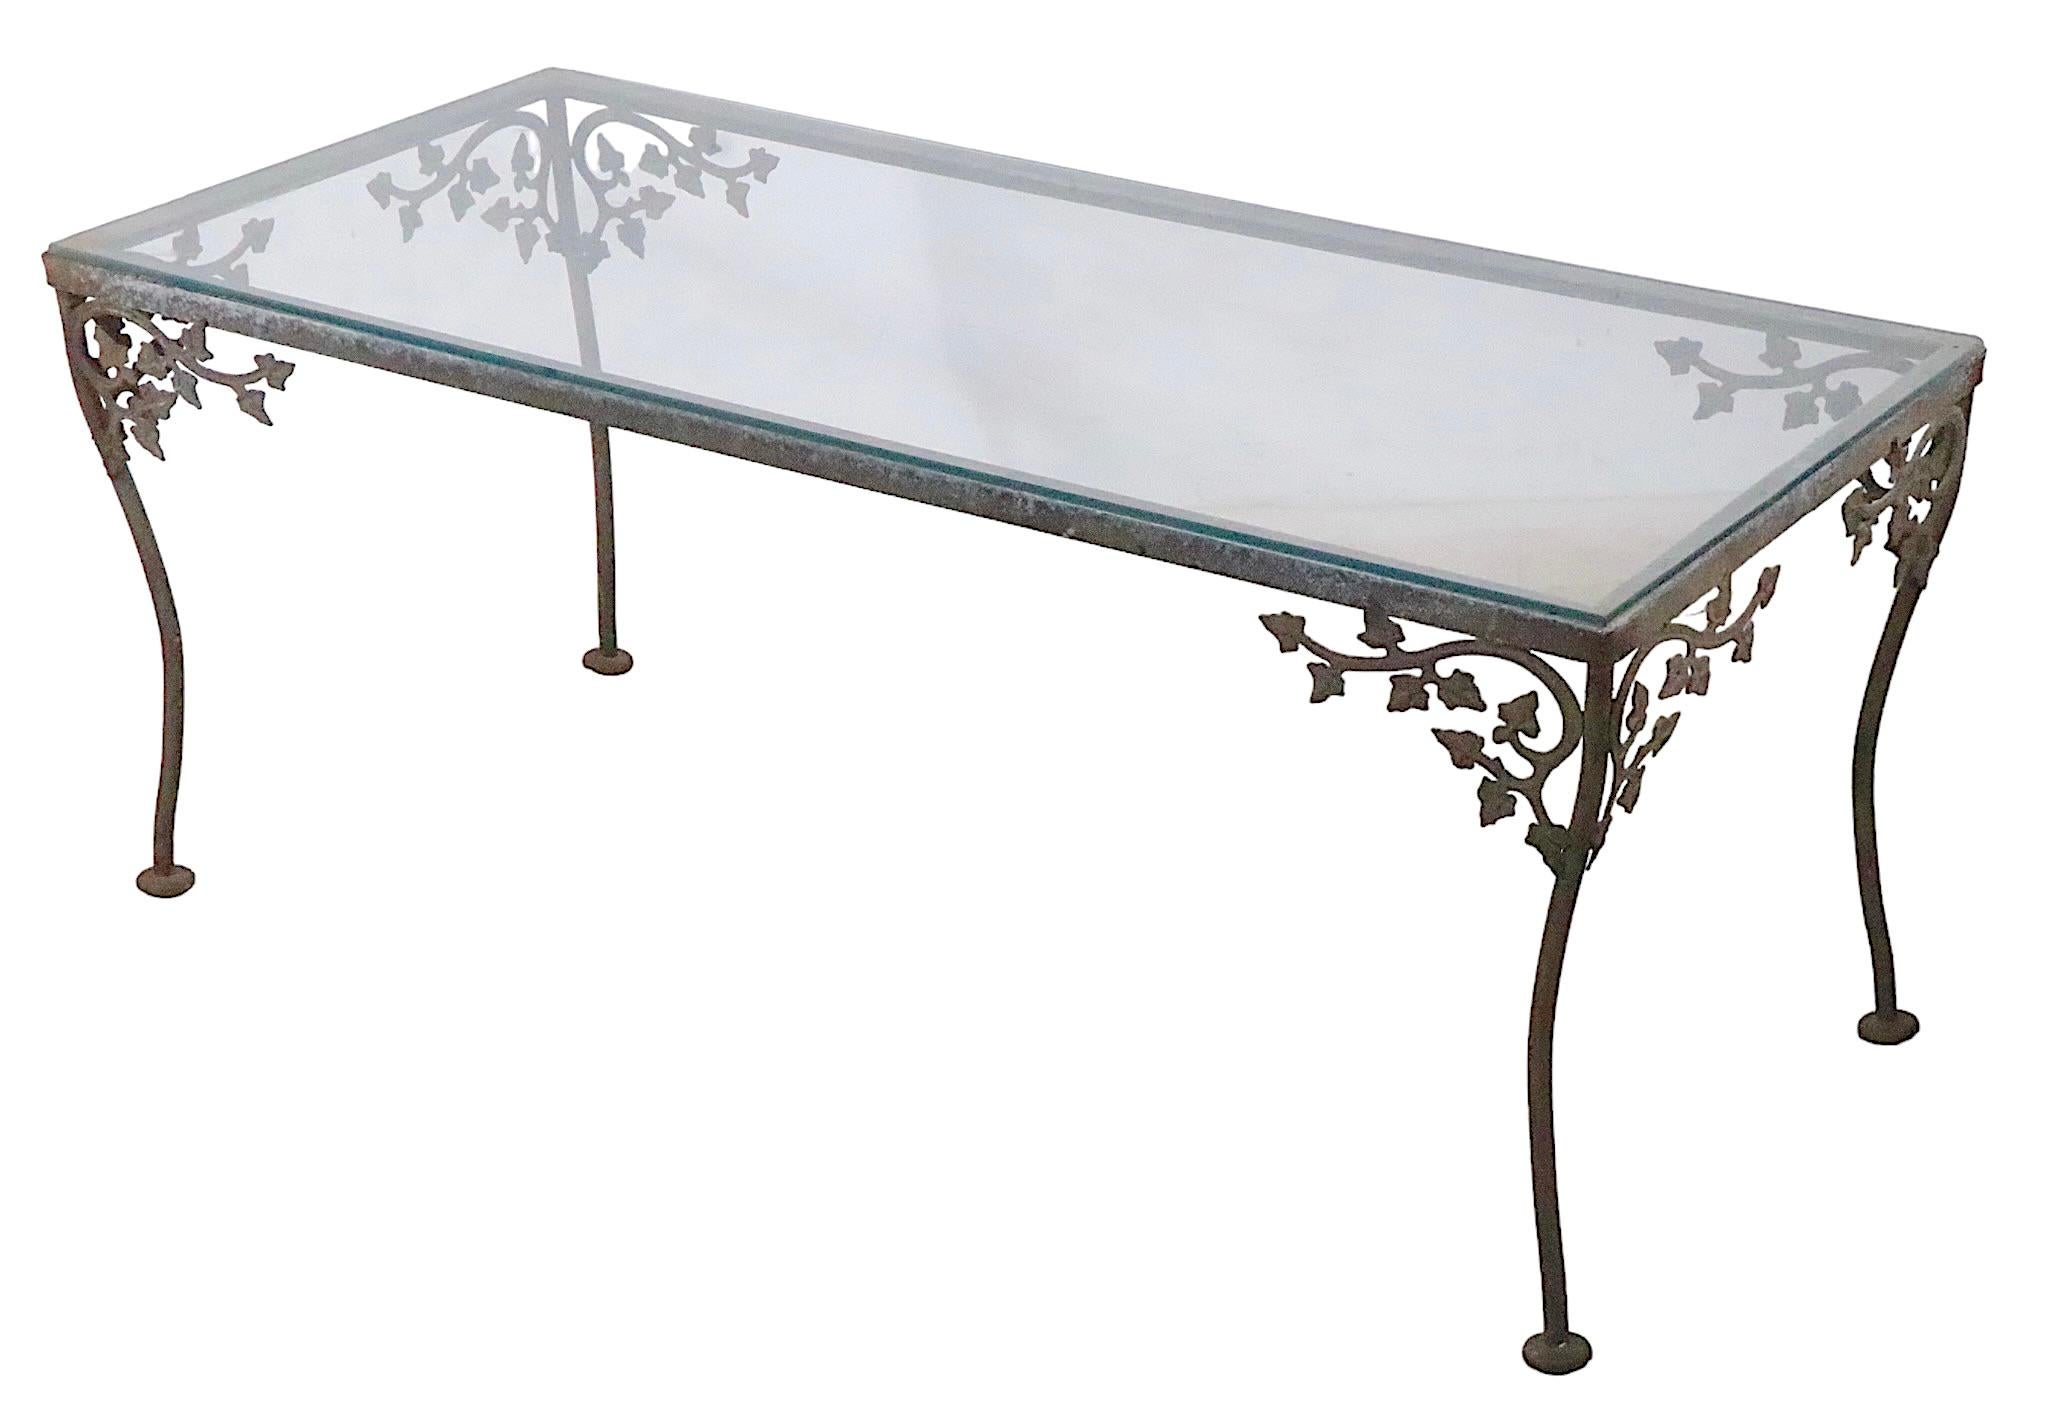 20th Century Wrought Iron Metal and Glass Coffee Table at. to Woodard Orleans For Sale